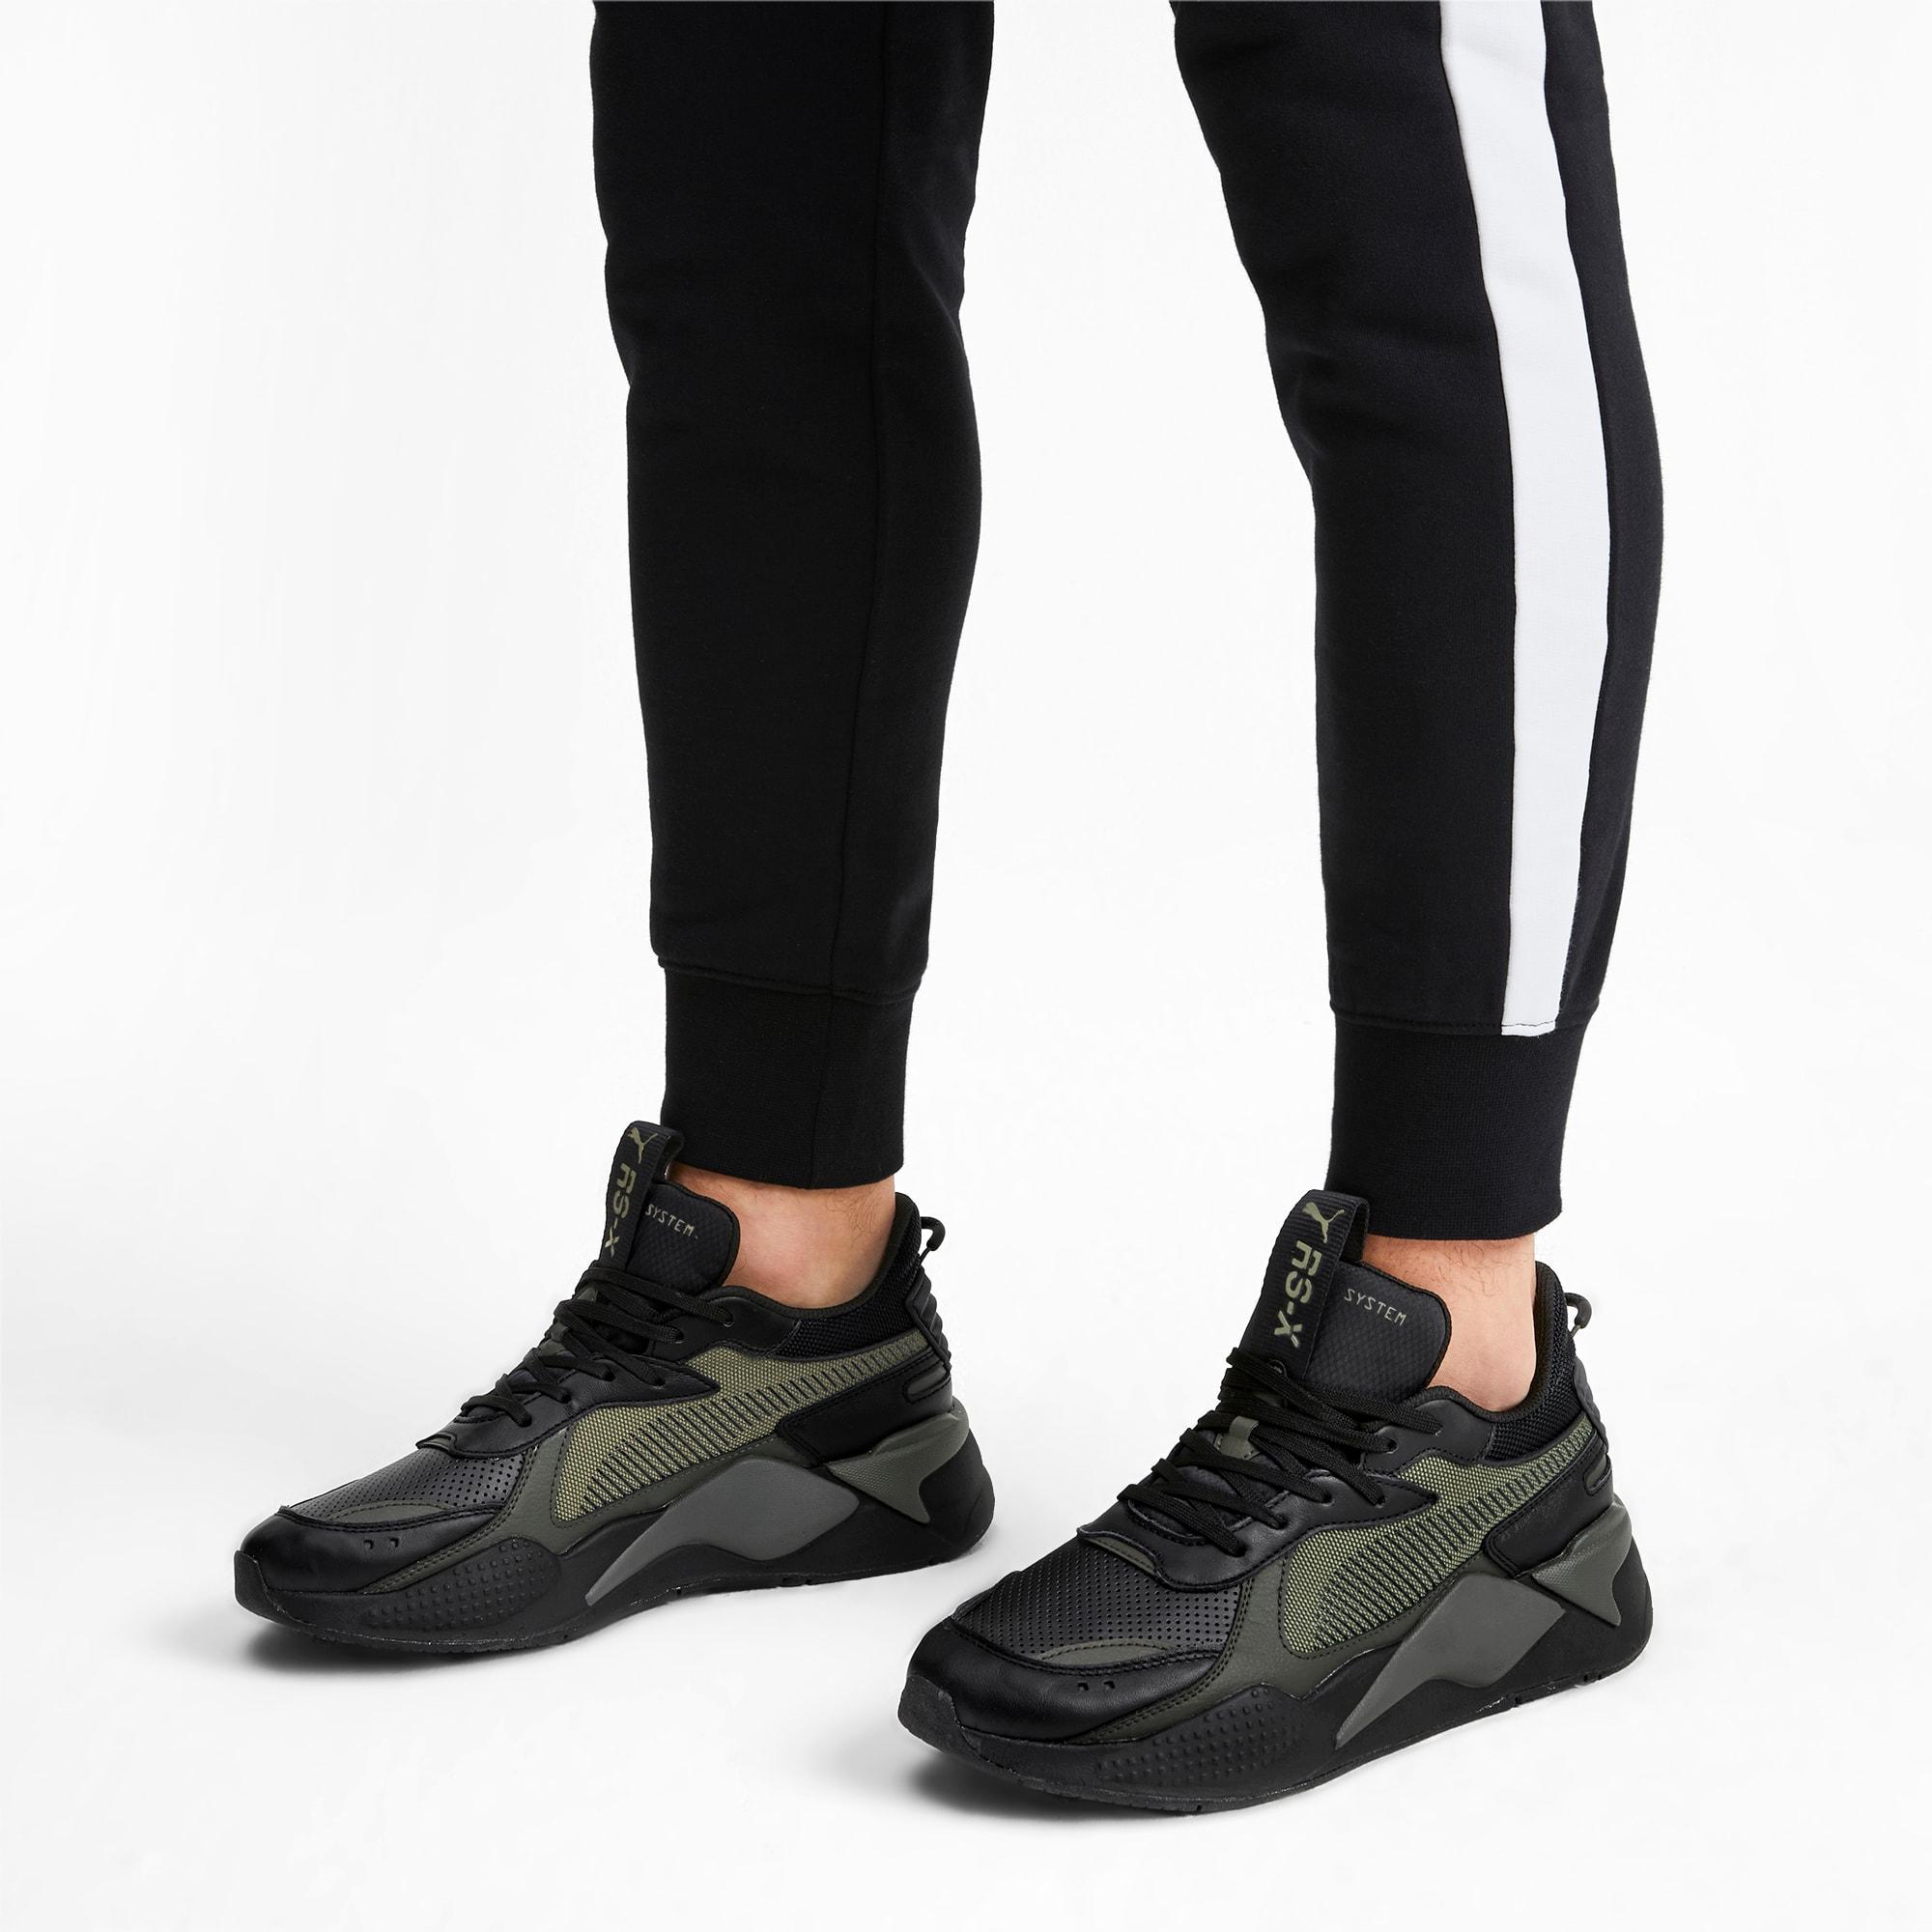 PUMA Leather Rs-x Winterized Sneakers in Black/Burnt Olive (Black) - Save  45% - Lyst